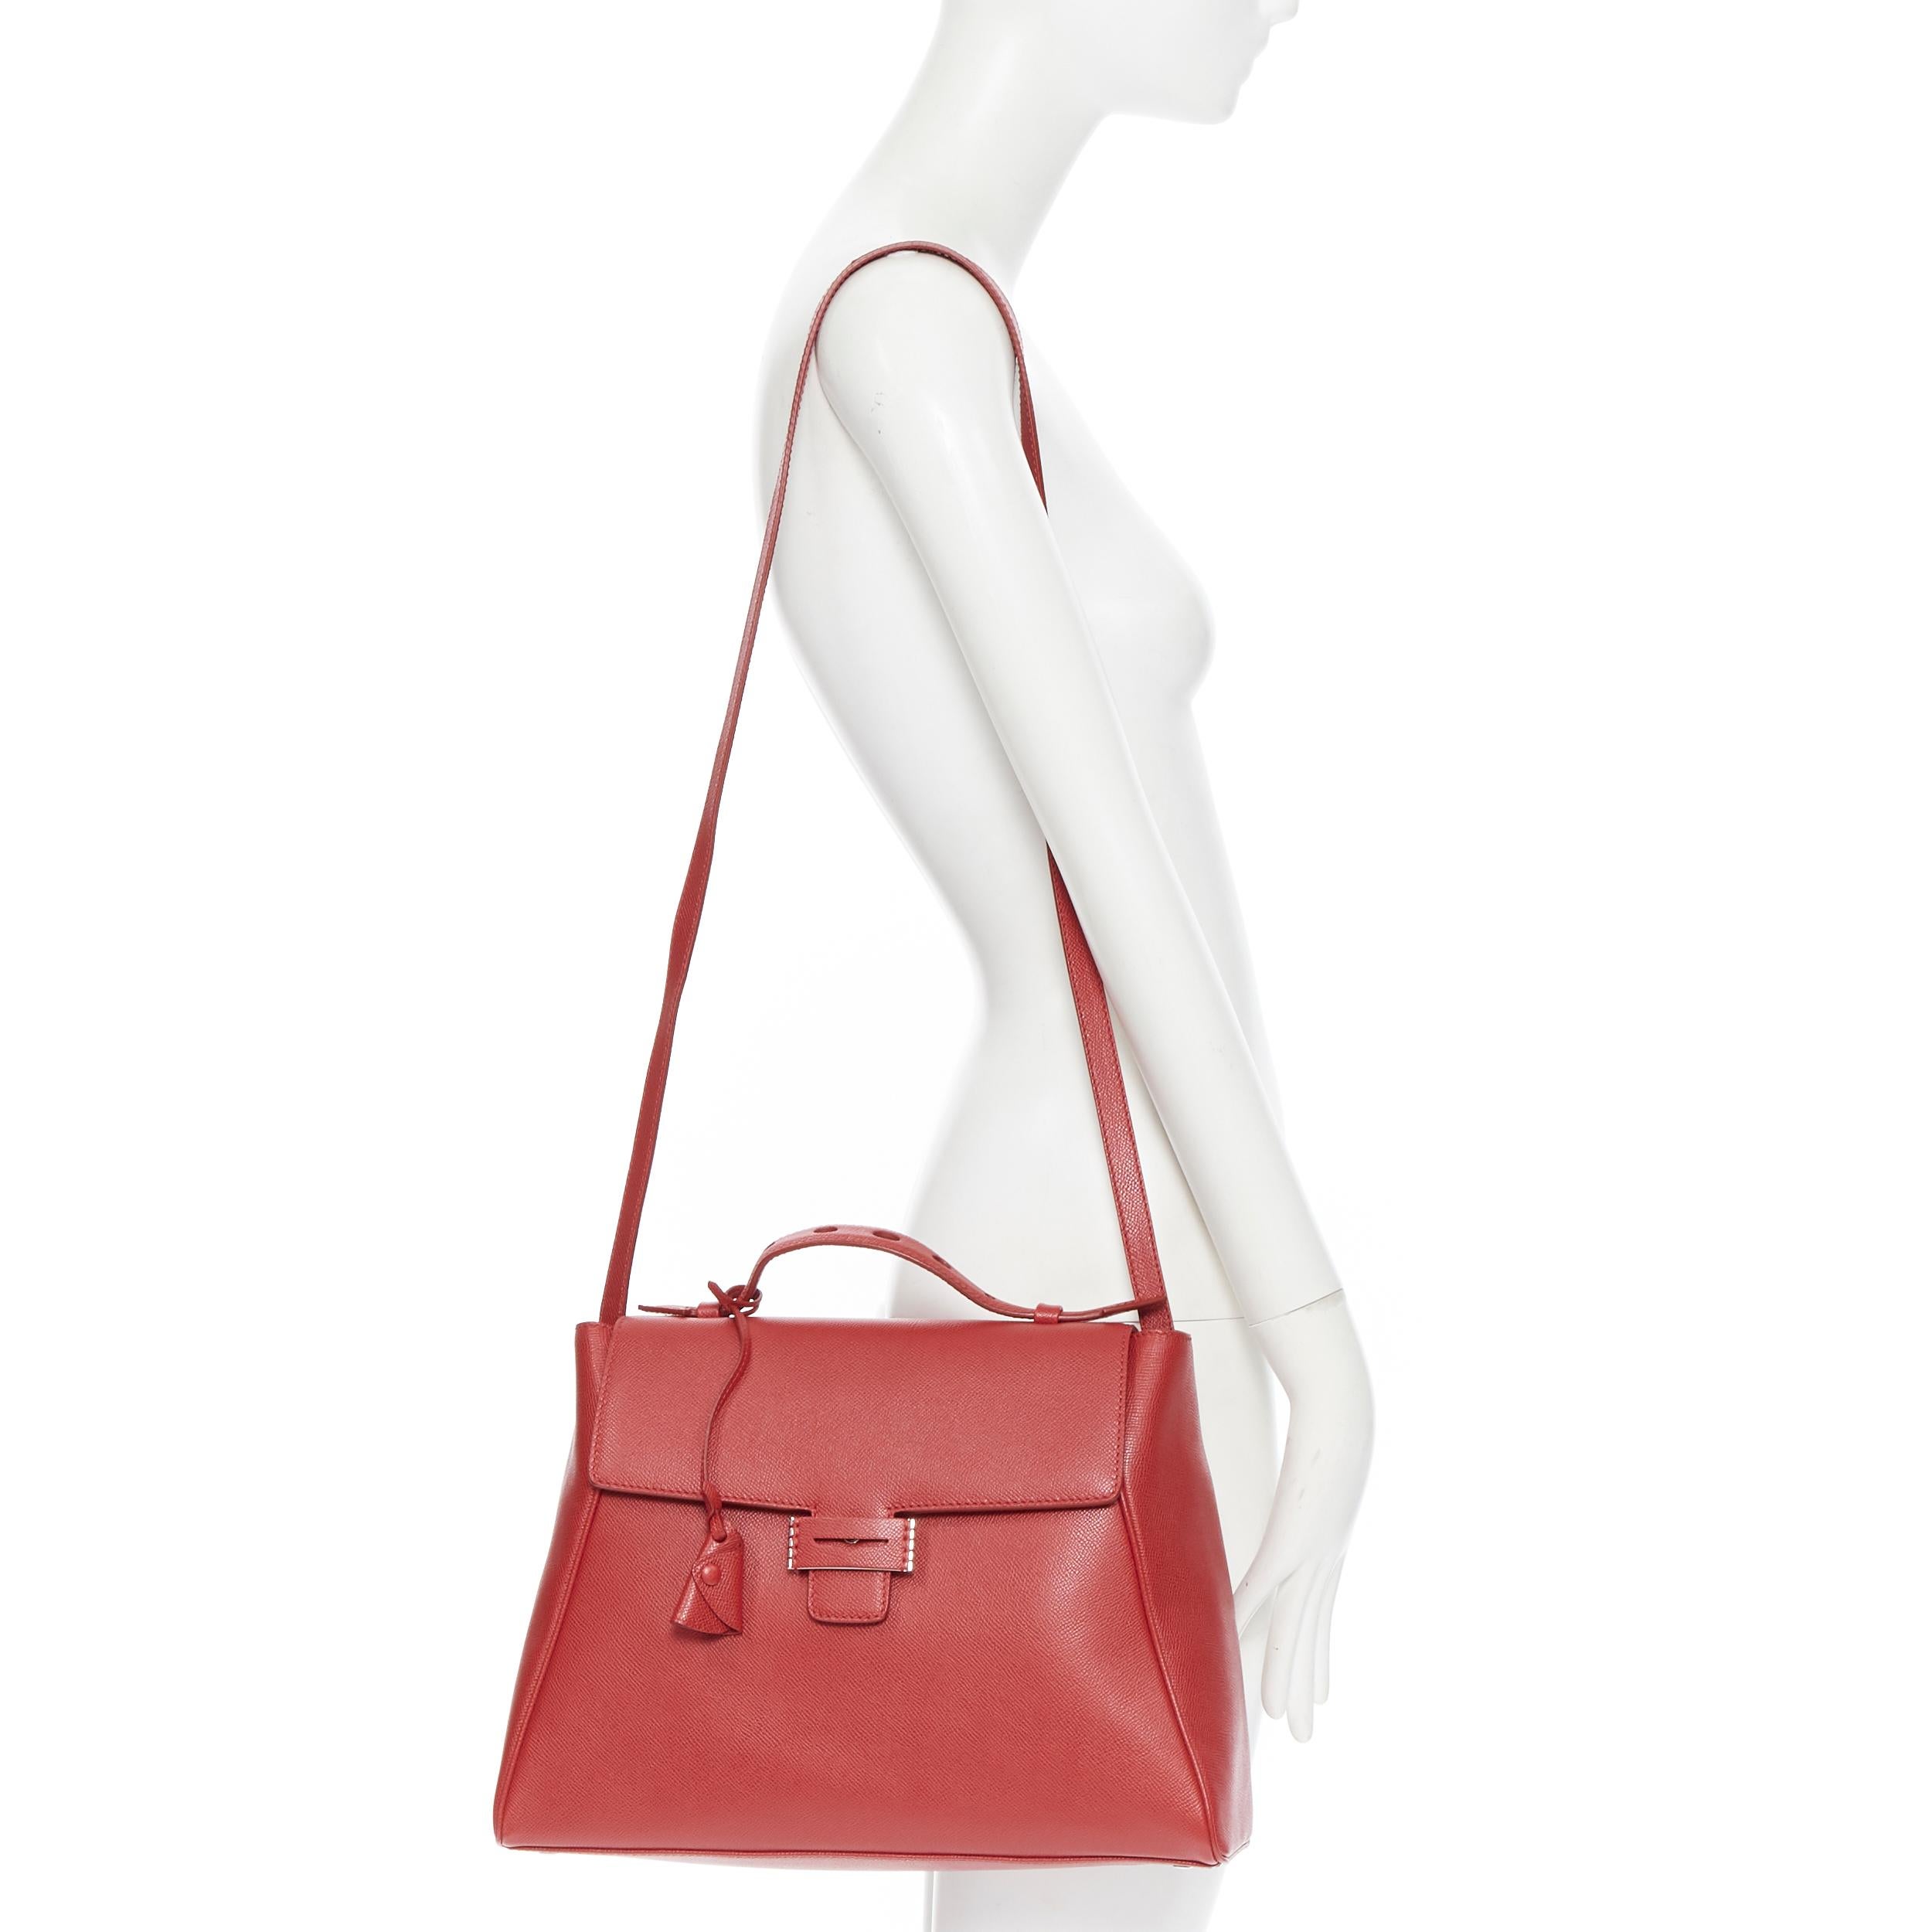 MYRIAM SCHAEFER Byron red leather cut out top handle satchel shoulder bag
Brand: Myriam Schaefer
Designer: Myriam Schaefer
Model Name / Style: Byron bag
Material: Leather
Color: Red
Pattern: Solid
Closure: Clasp
Extra Detail: Byron satchel. Red